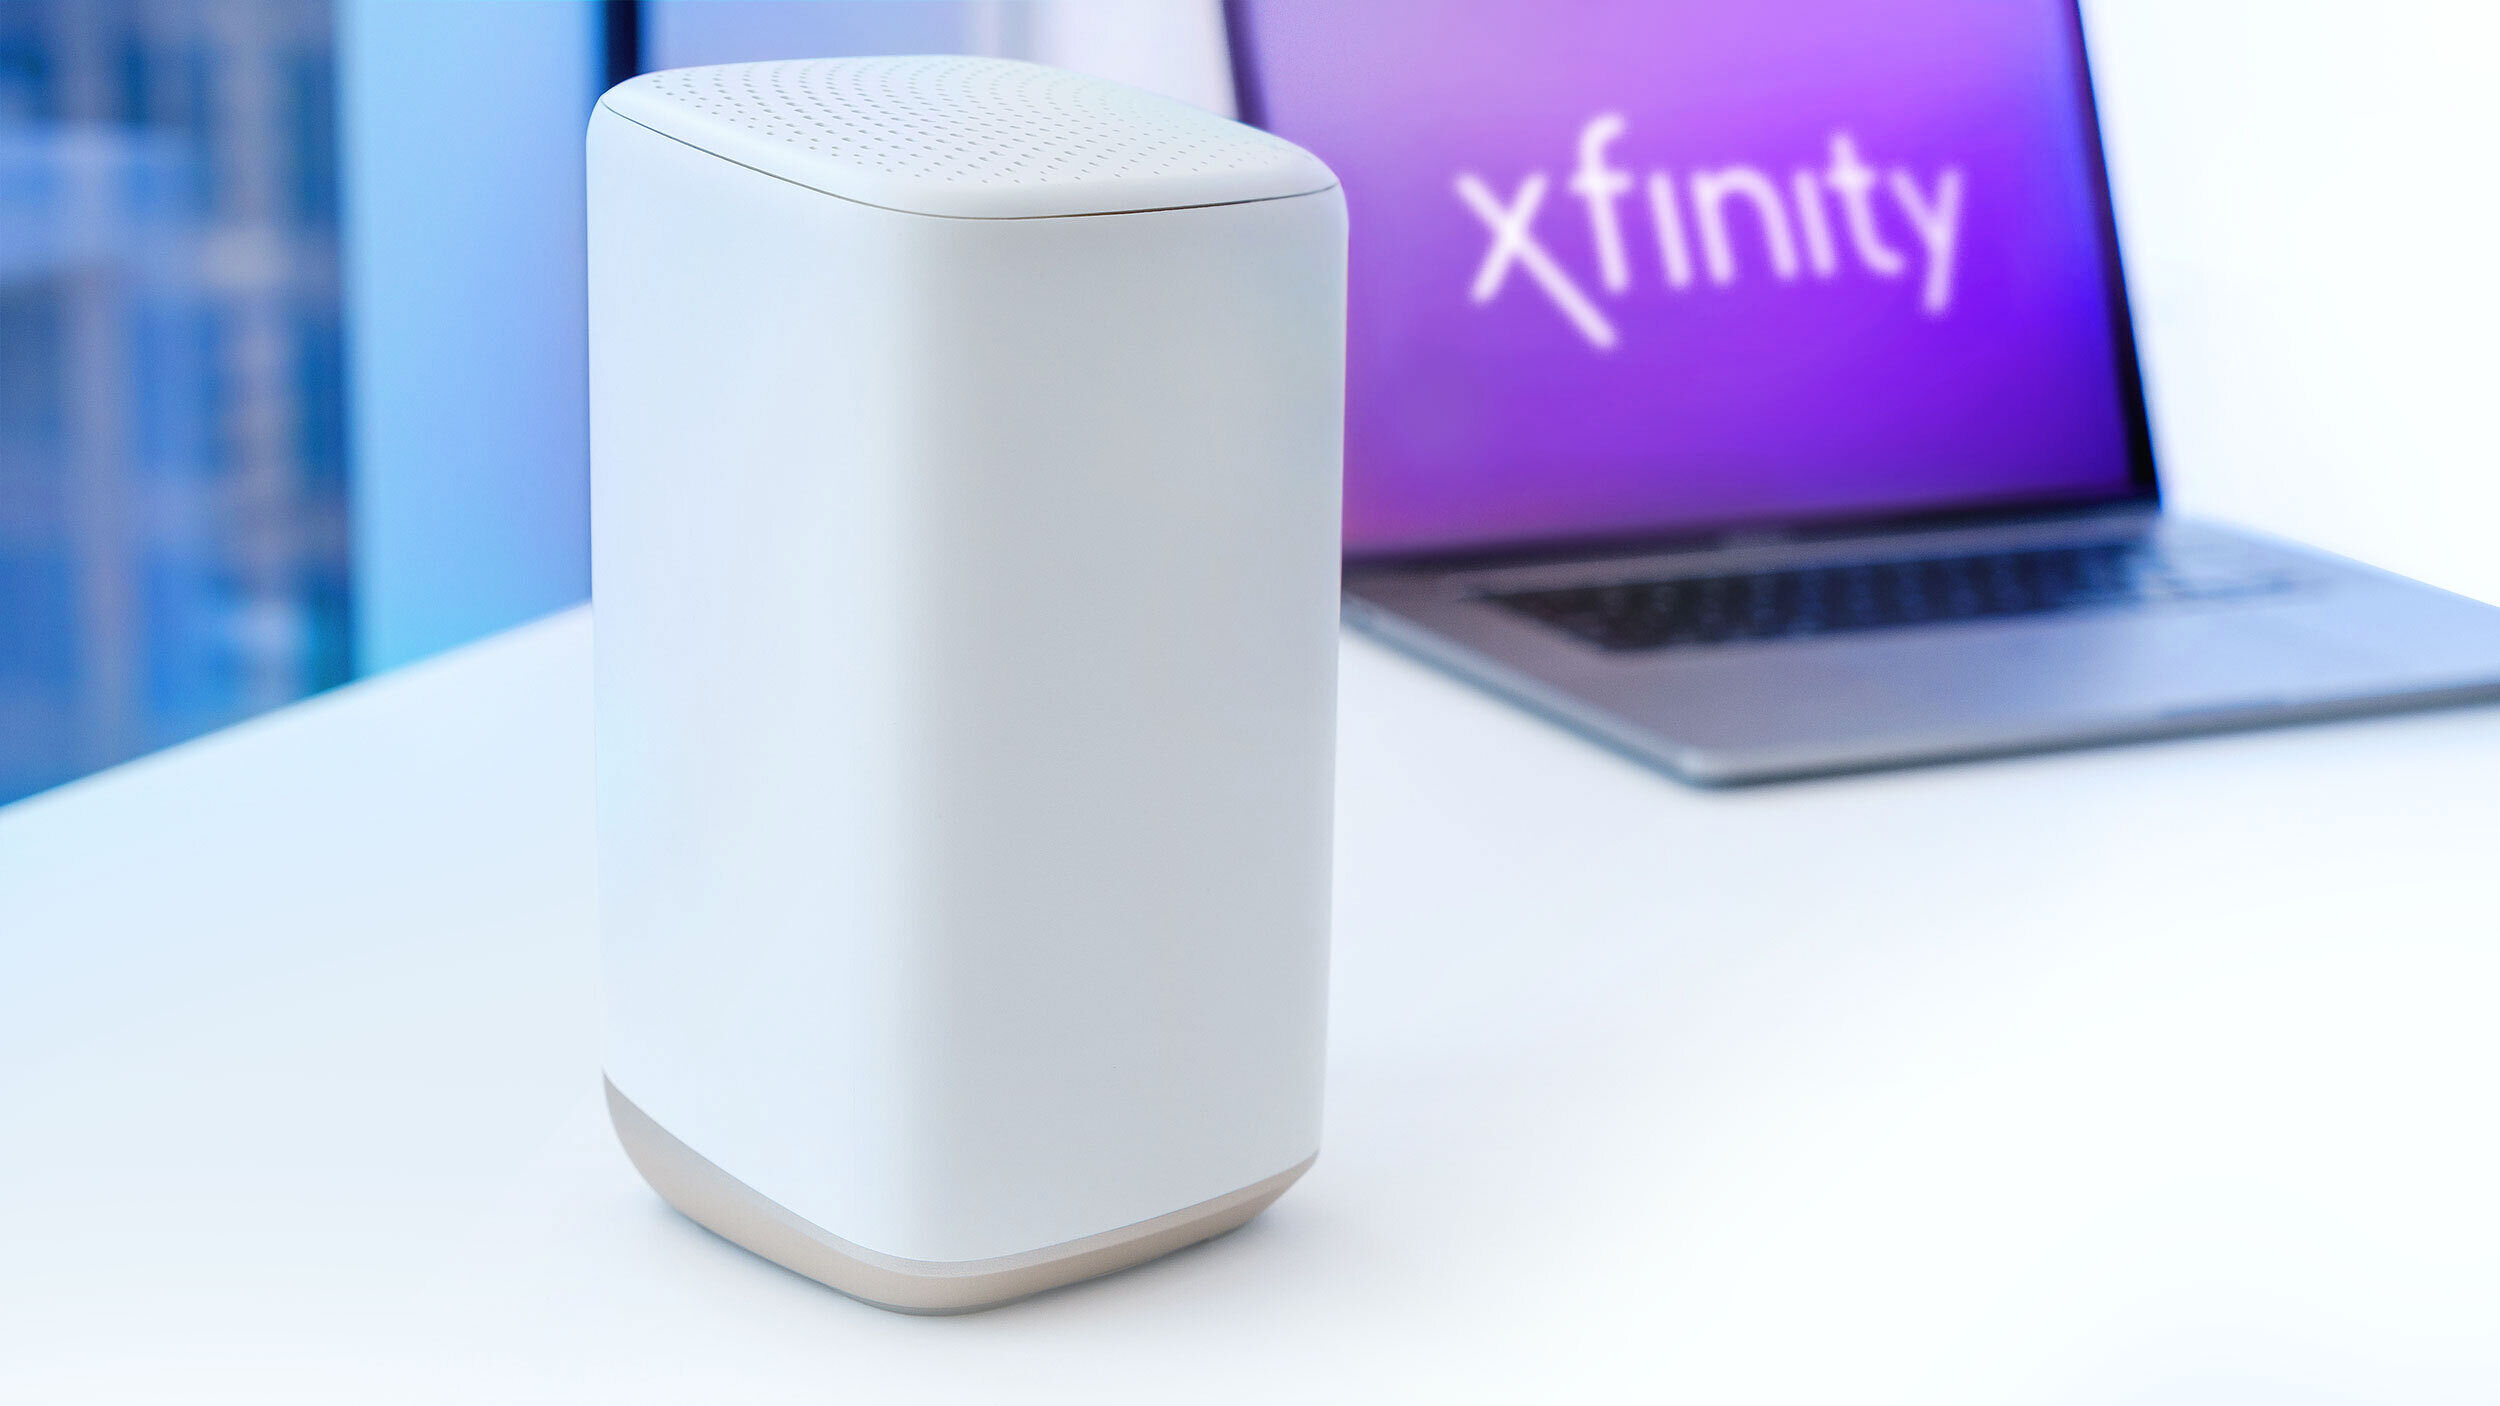 How To Reset An Xfinity Wi-Fi Router